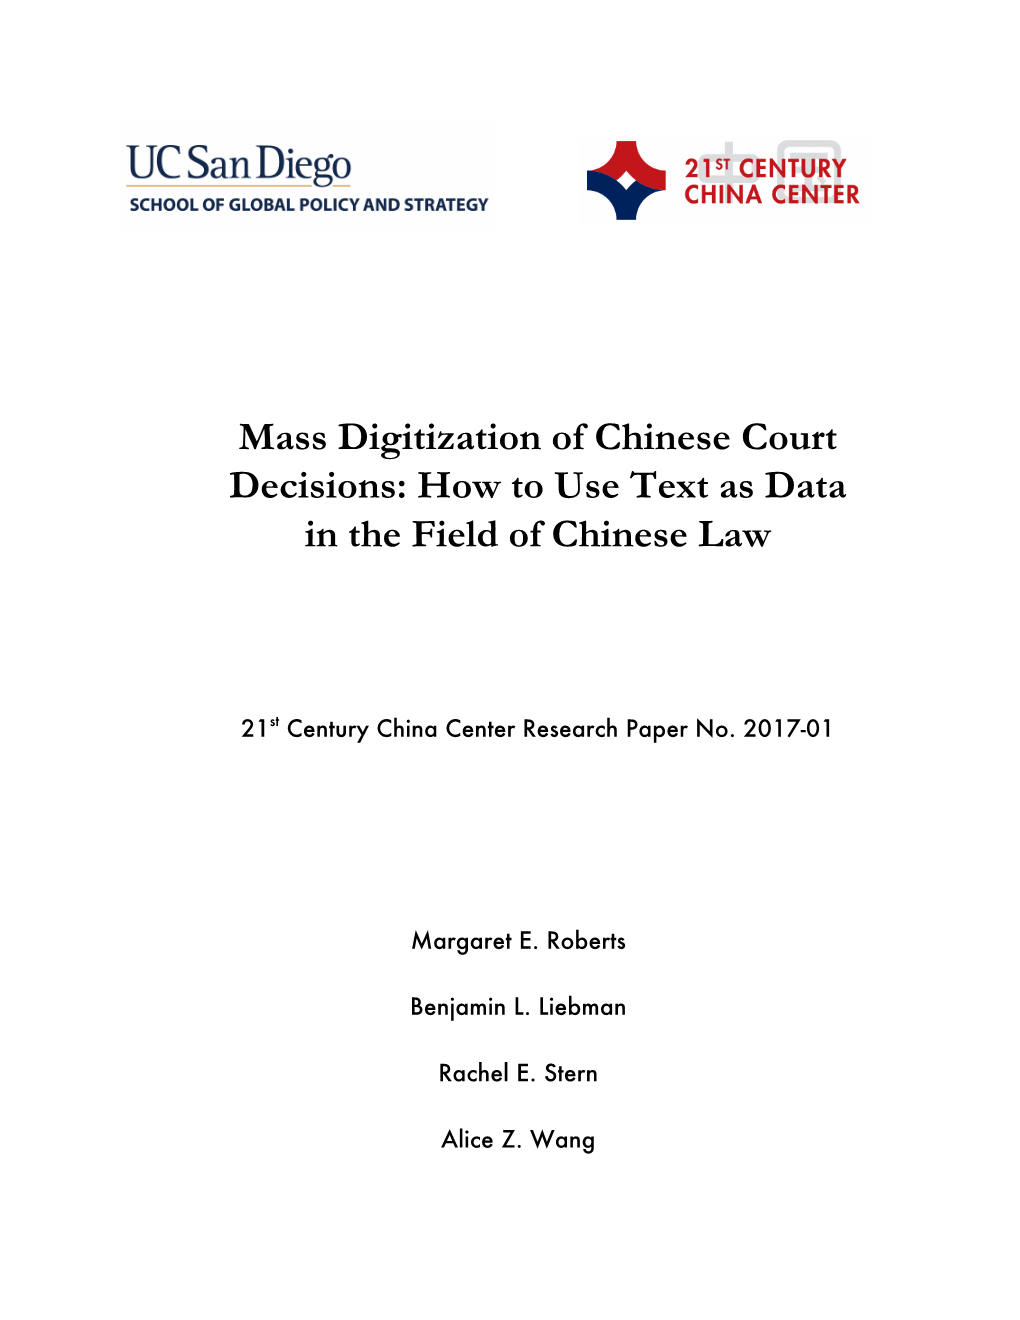 Mass Digitization of Chinese Court Decisions: How to Use Text As Data in the Field of Chinese Law